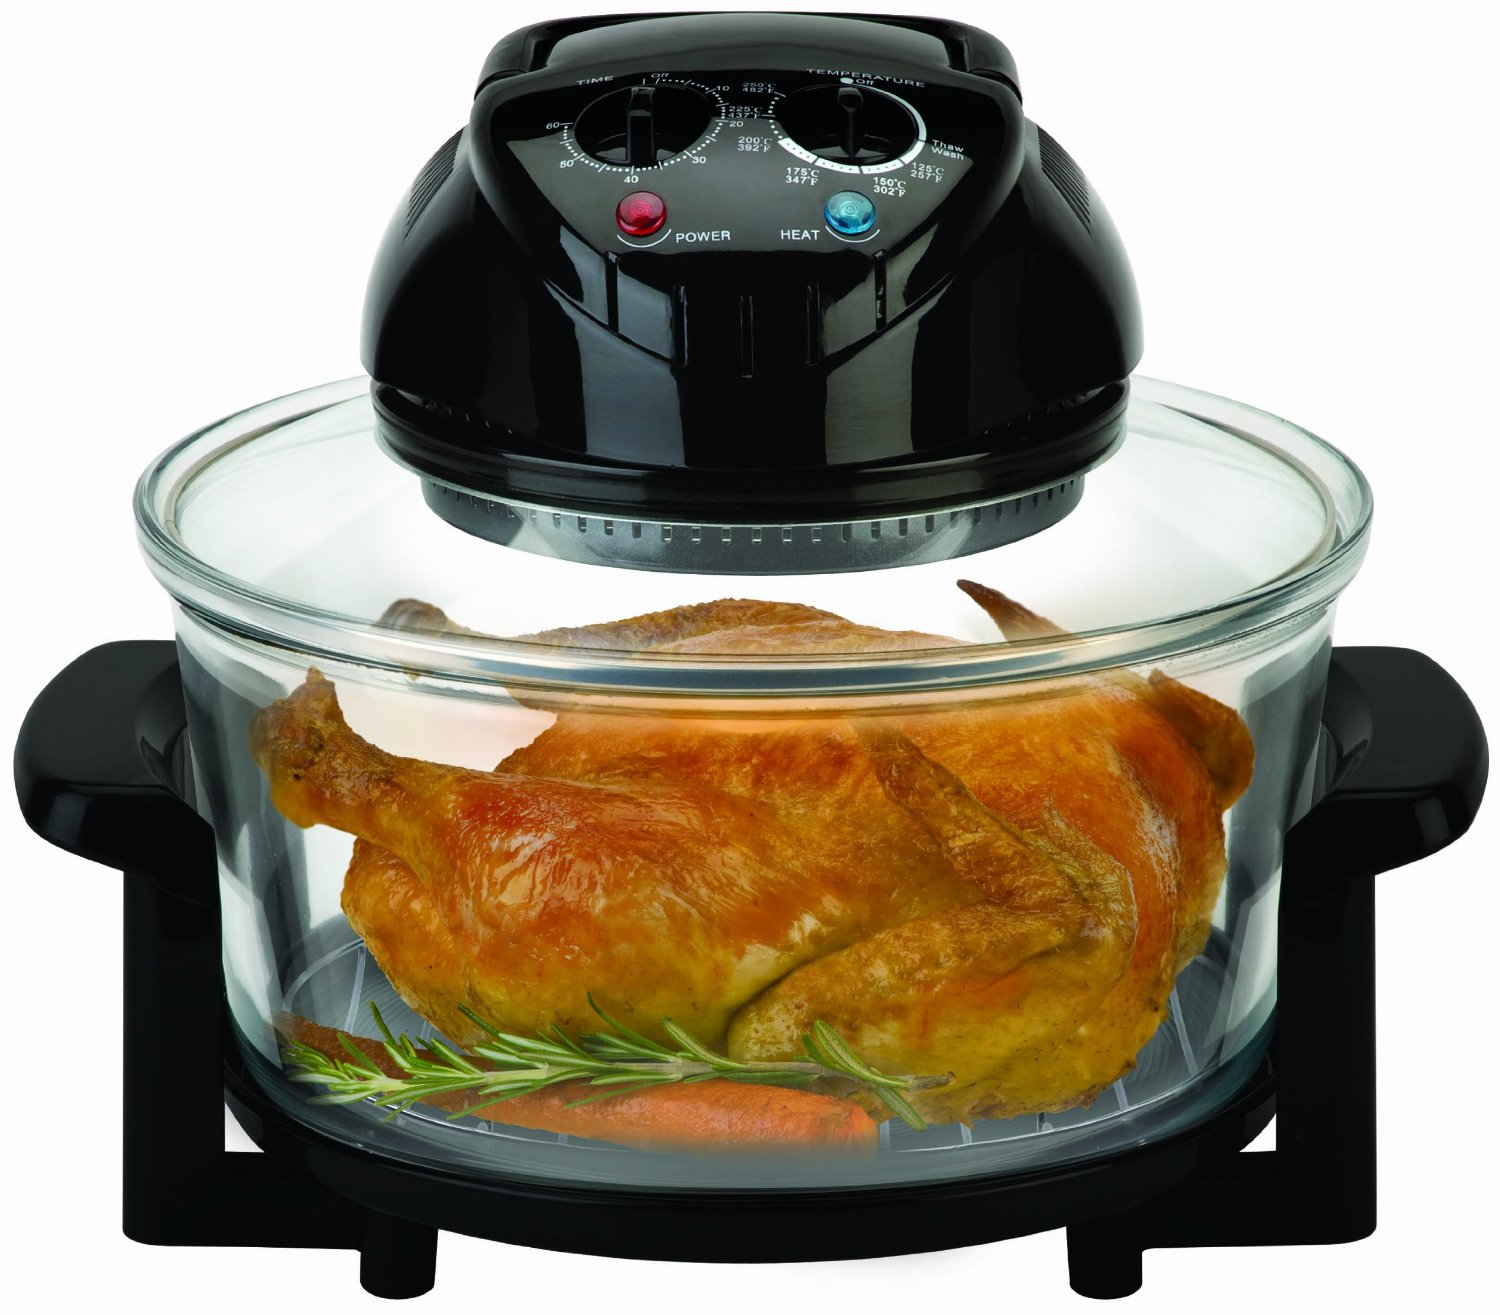 Big Boss Rapid Wave Halogen Infrared Convection Countertop Oven - 16 Quart with Extender Ring Glass Bowl